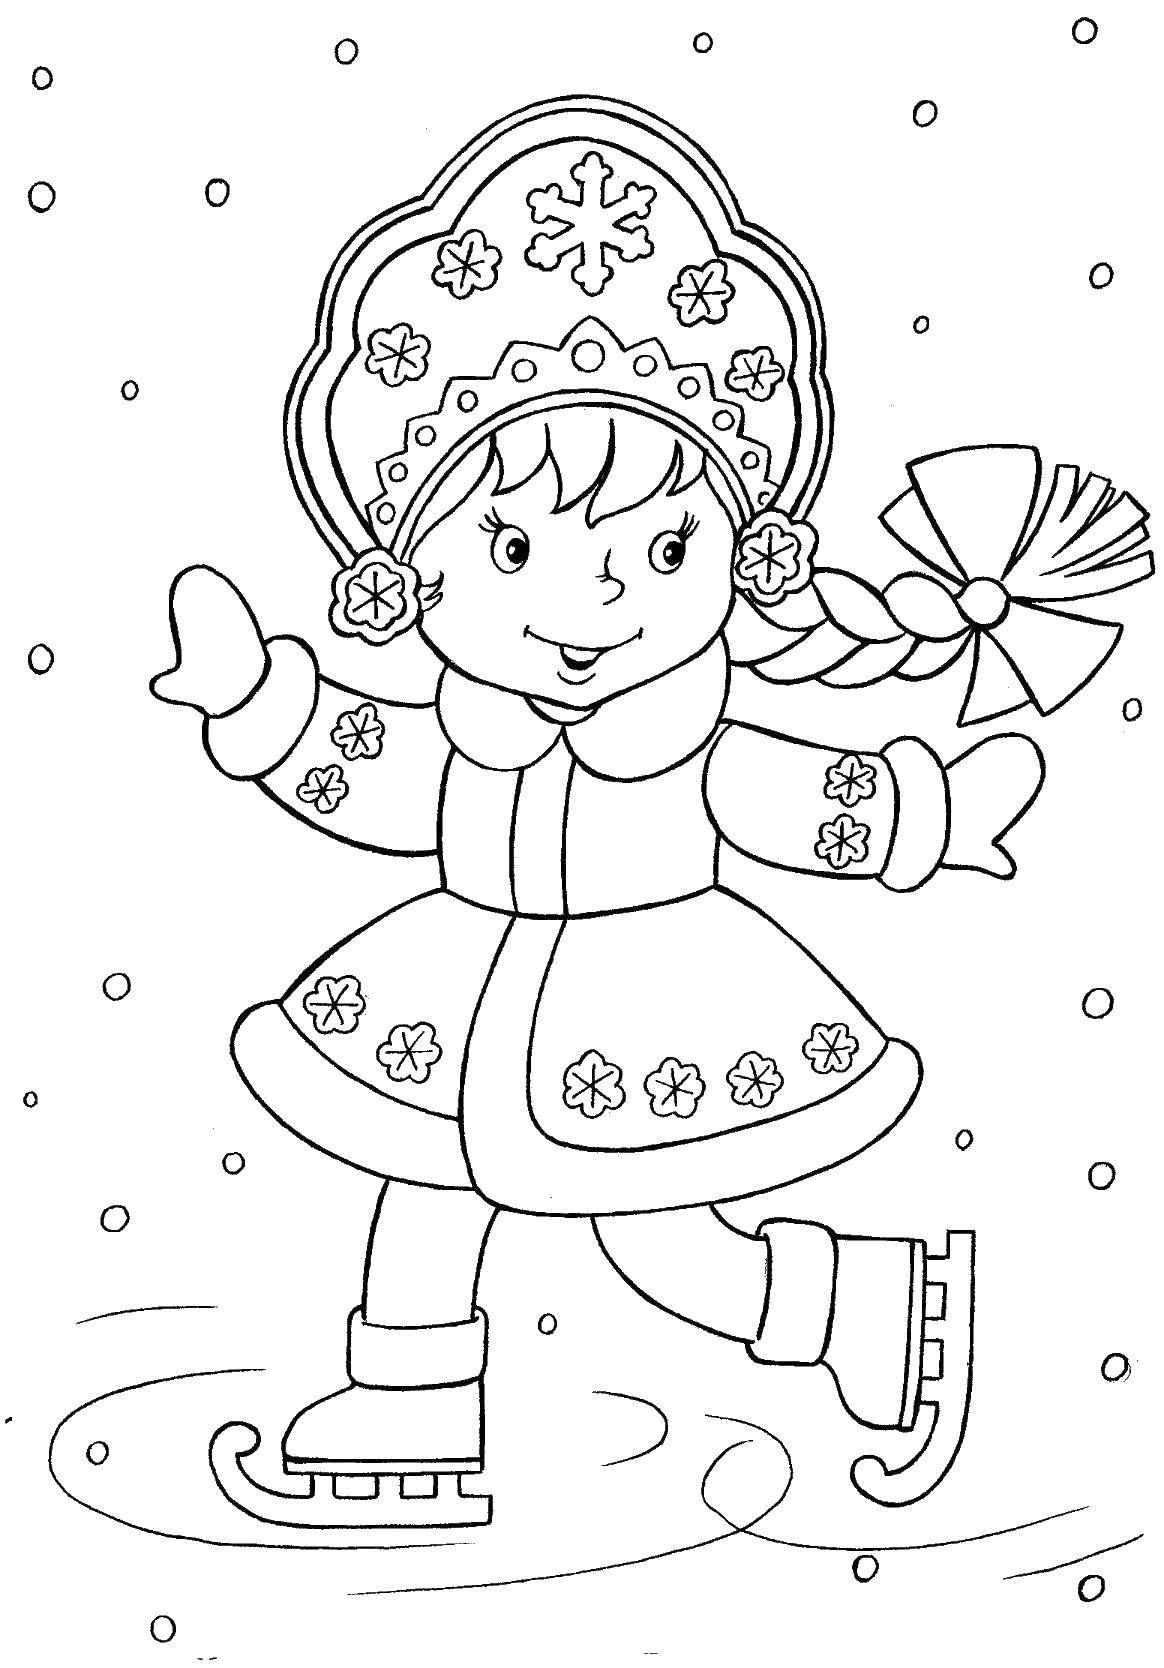 Coloring Snow maiden ice skater. Category maiden. Tags:  Grandfather frost, snow maiden.